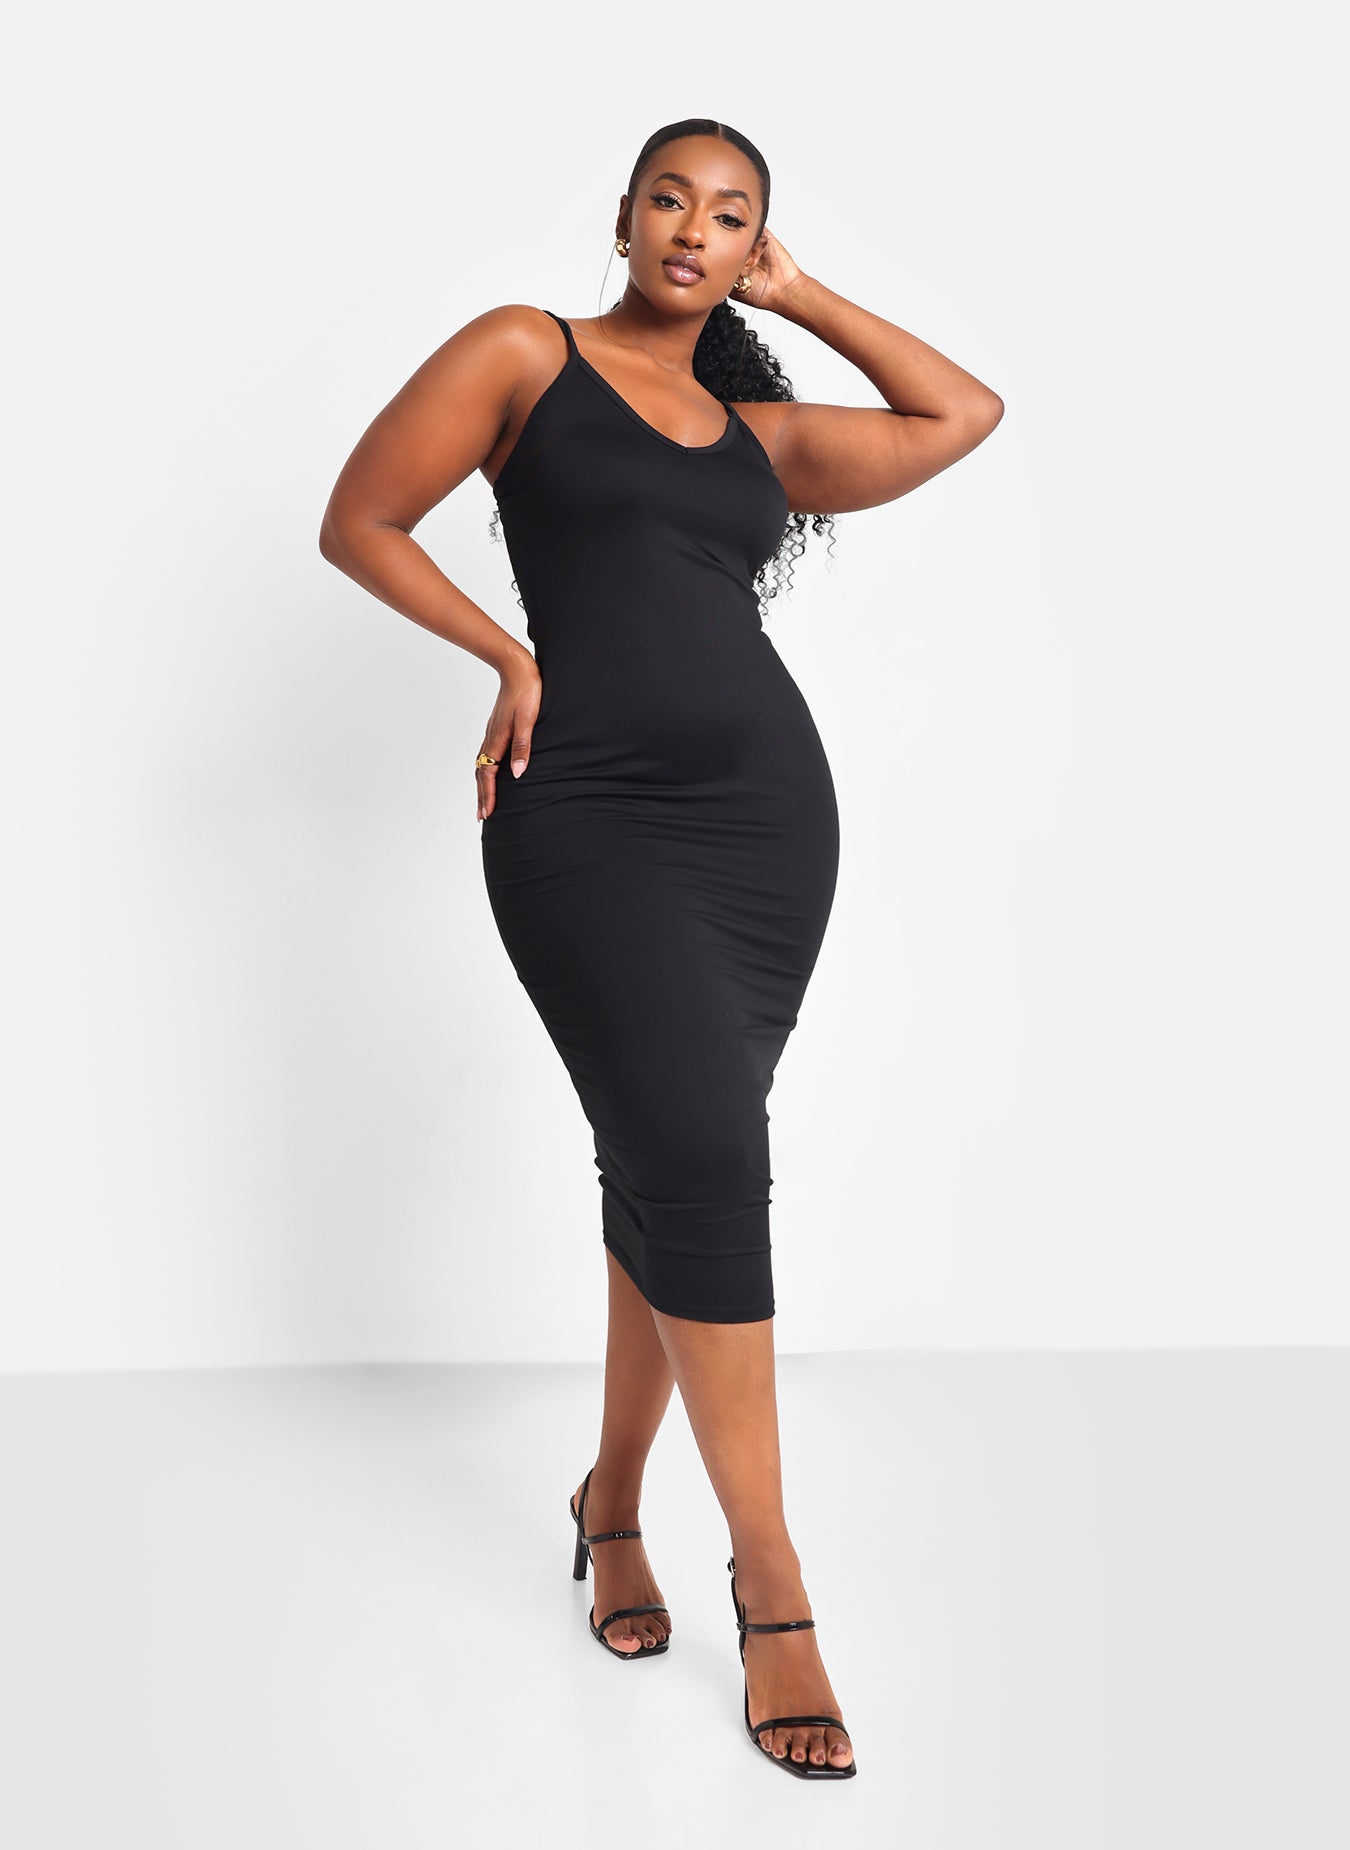 Garnerstyle for Rebdolls, Sizes Small - 5X  Plus size fashion, Plus size  fashionista, Plus size outfits